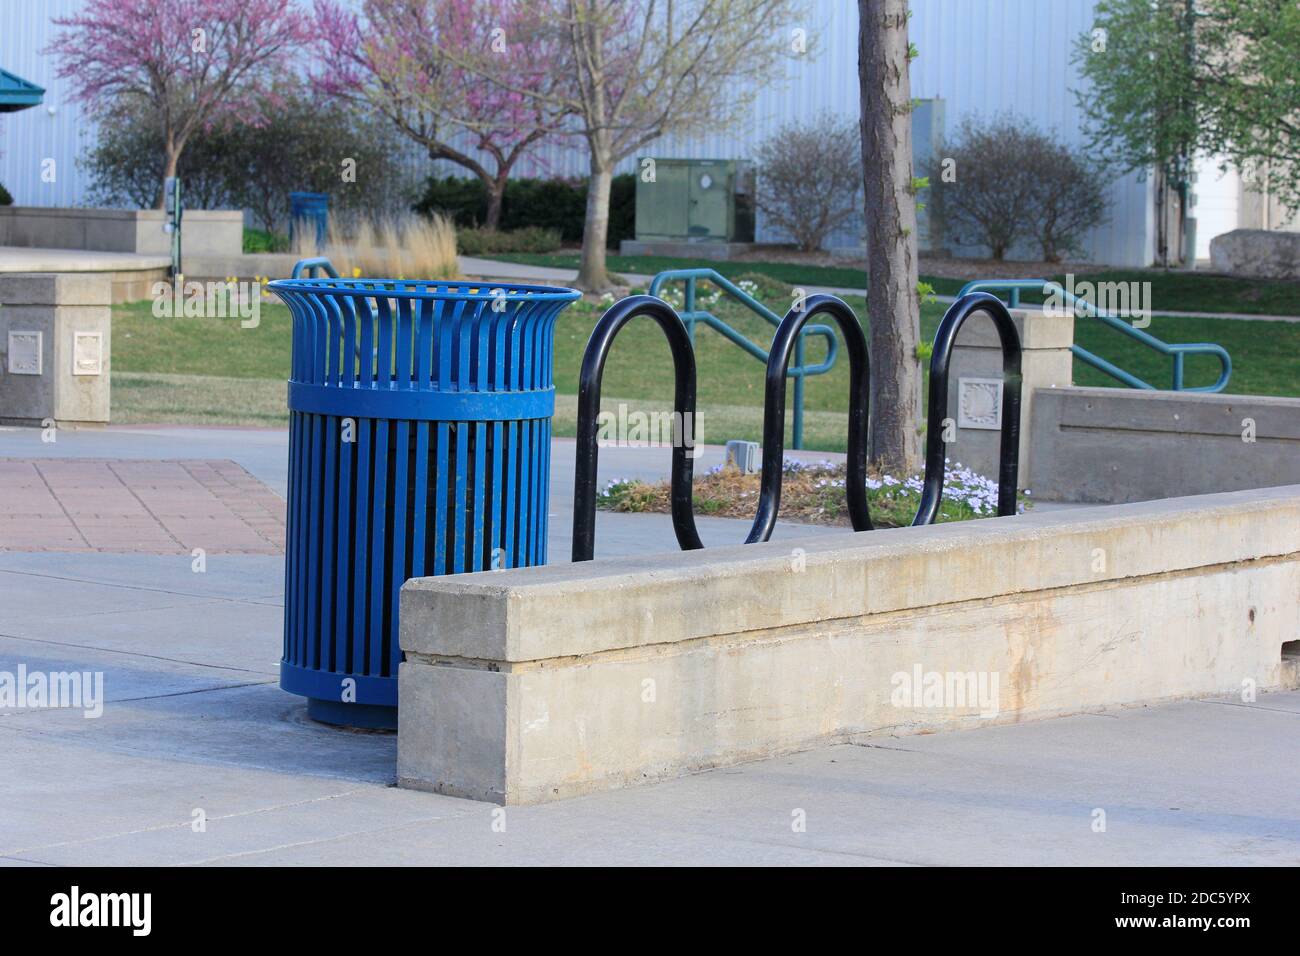 Hutchinson Kansas city park with green grass, tree's, trash can and cement side walk on a spring day. Stock Photo